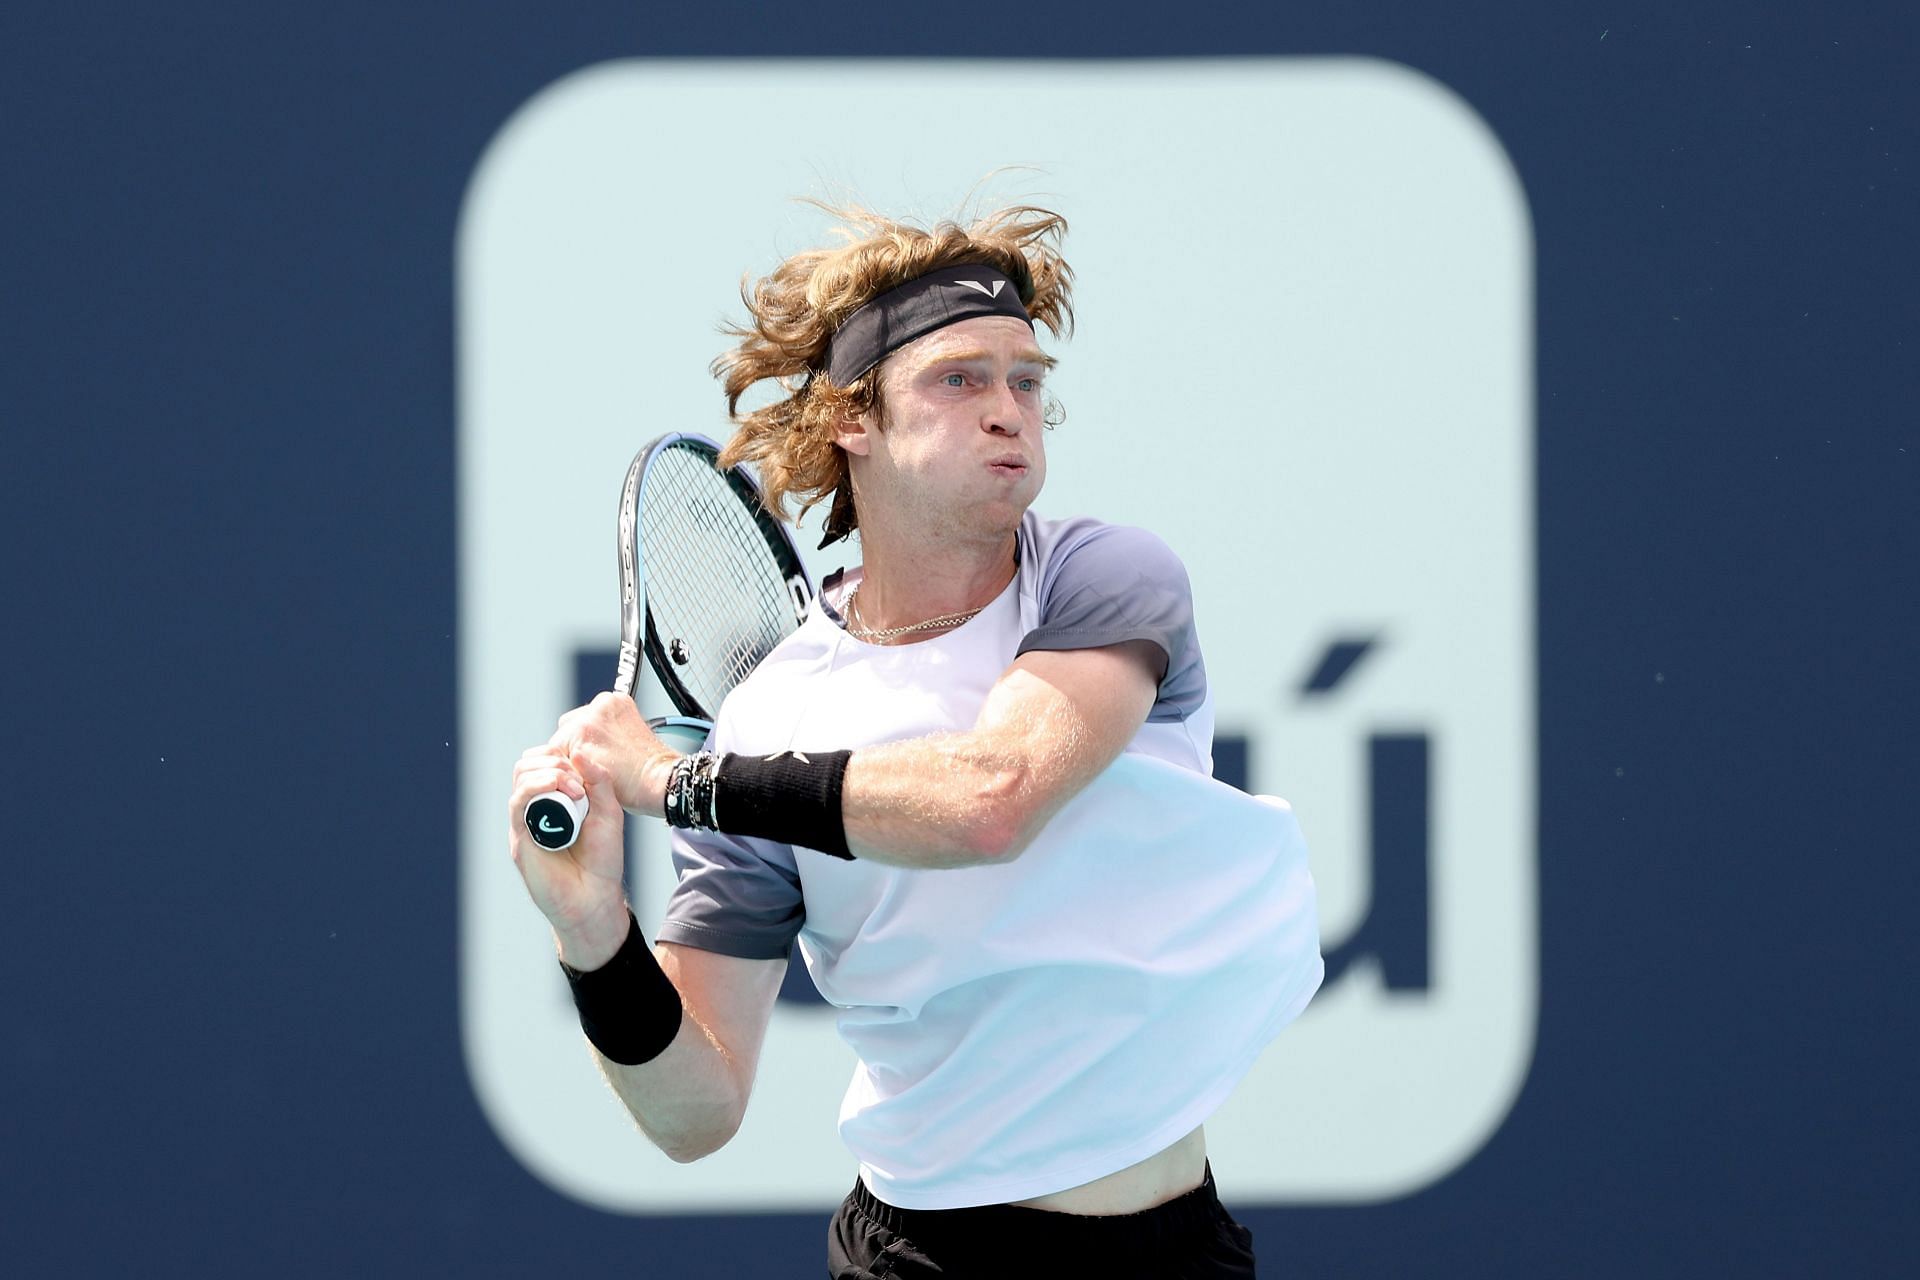 Rublev is looking to reach the Miami fourth round.